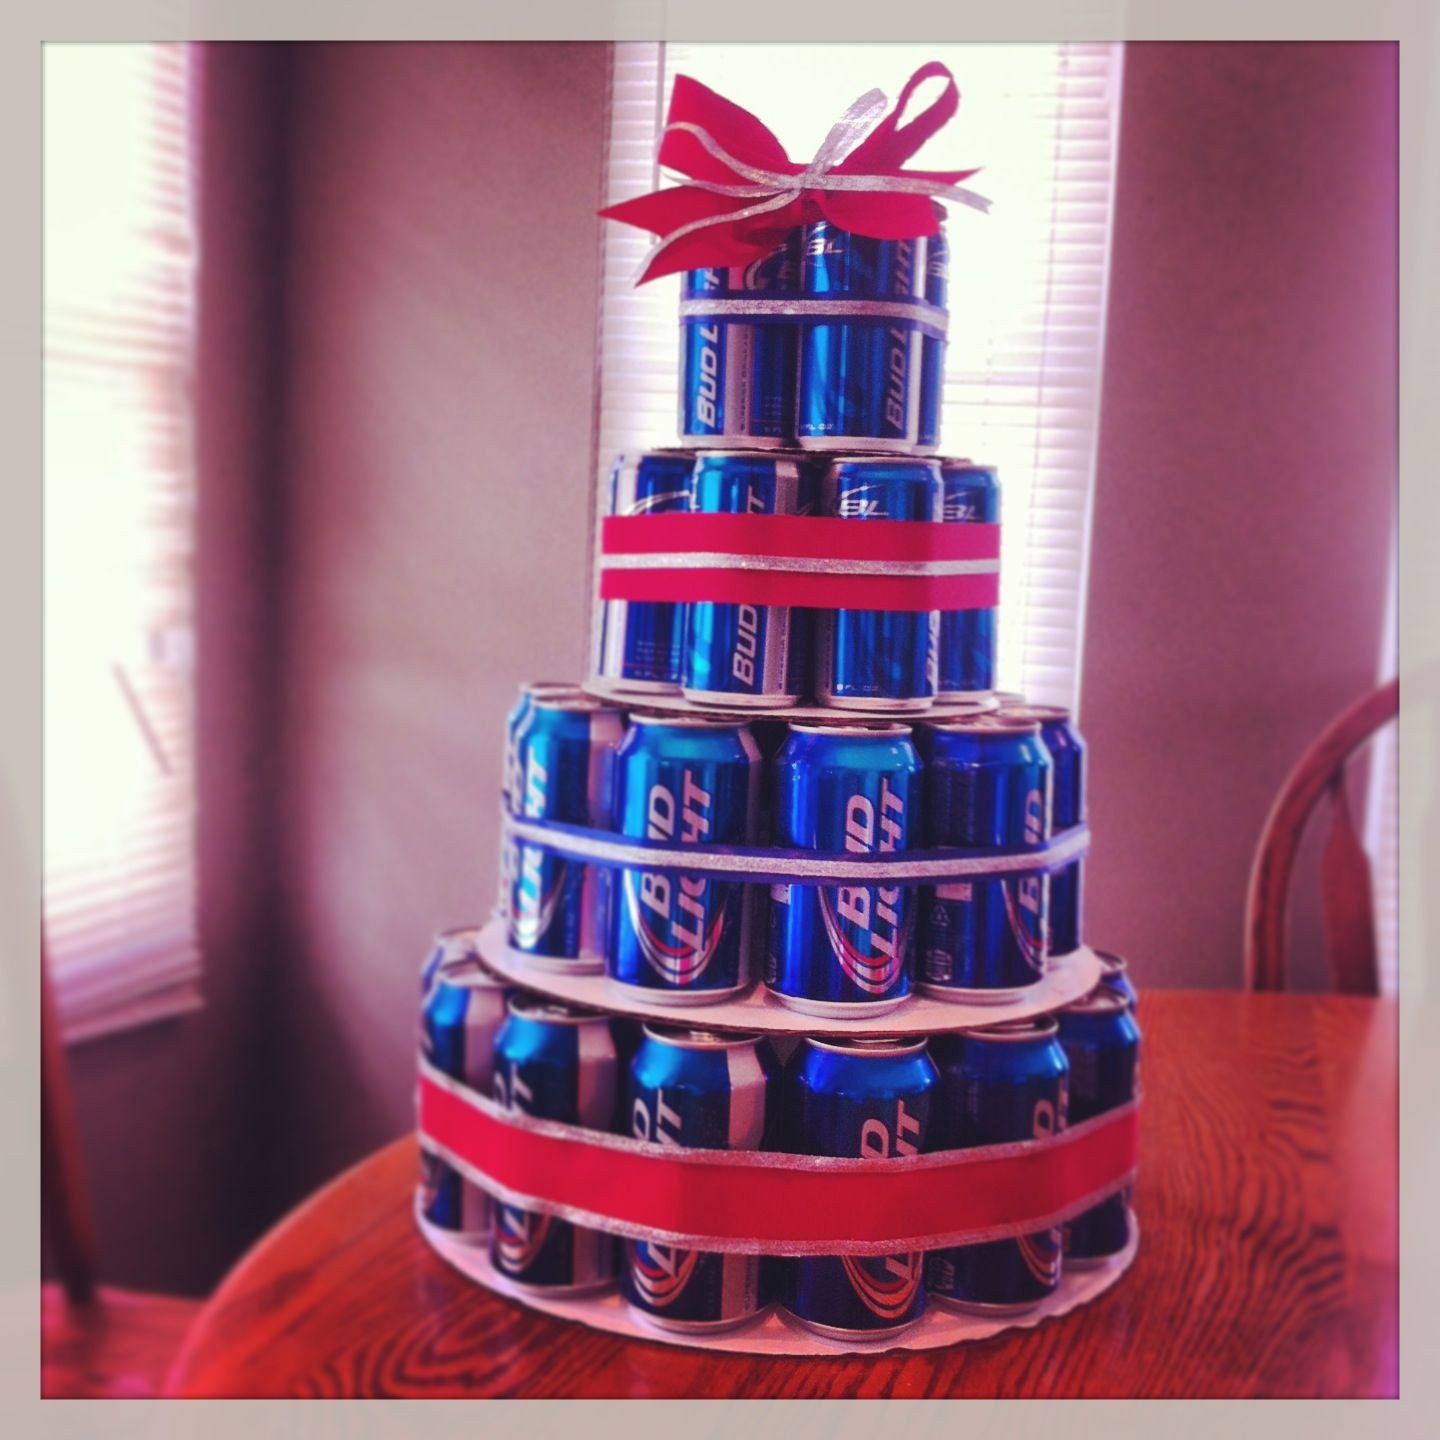 Beer Can Birthday Cake
 The beer can cake I made Birthday Fun